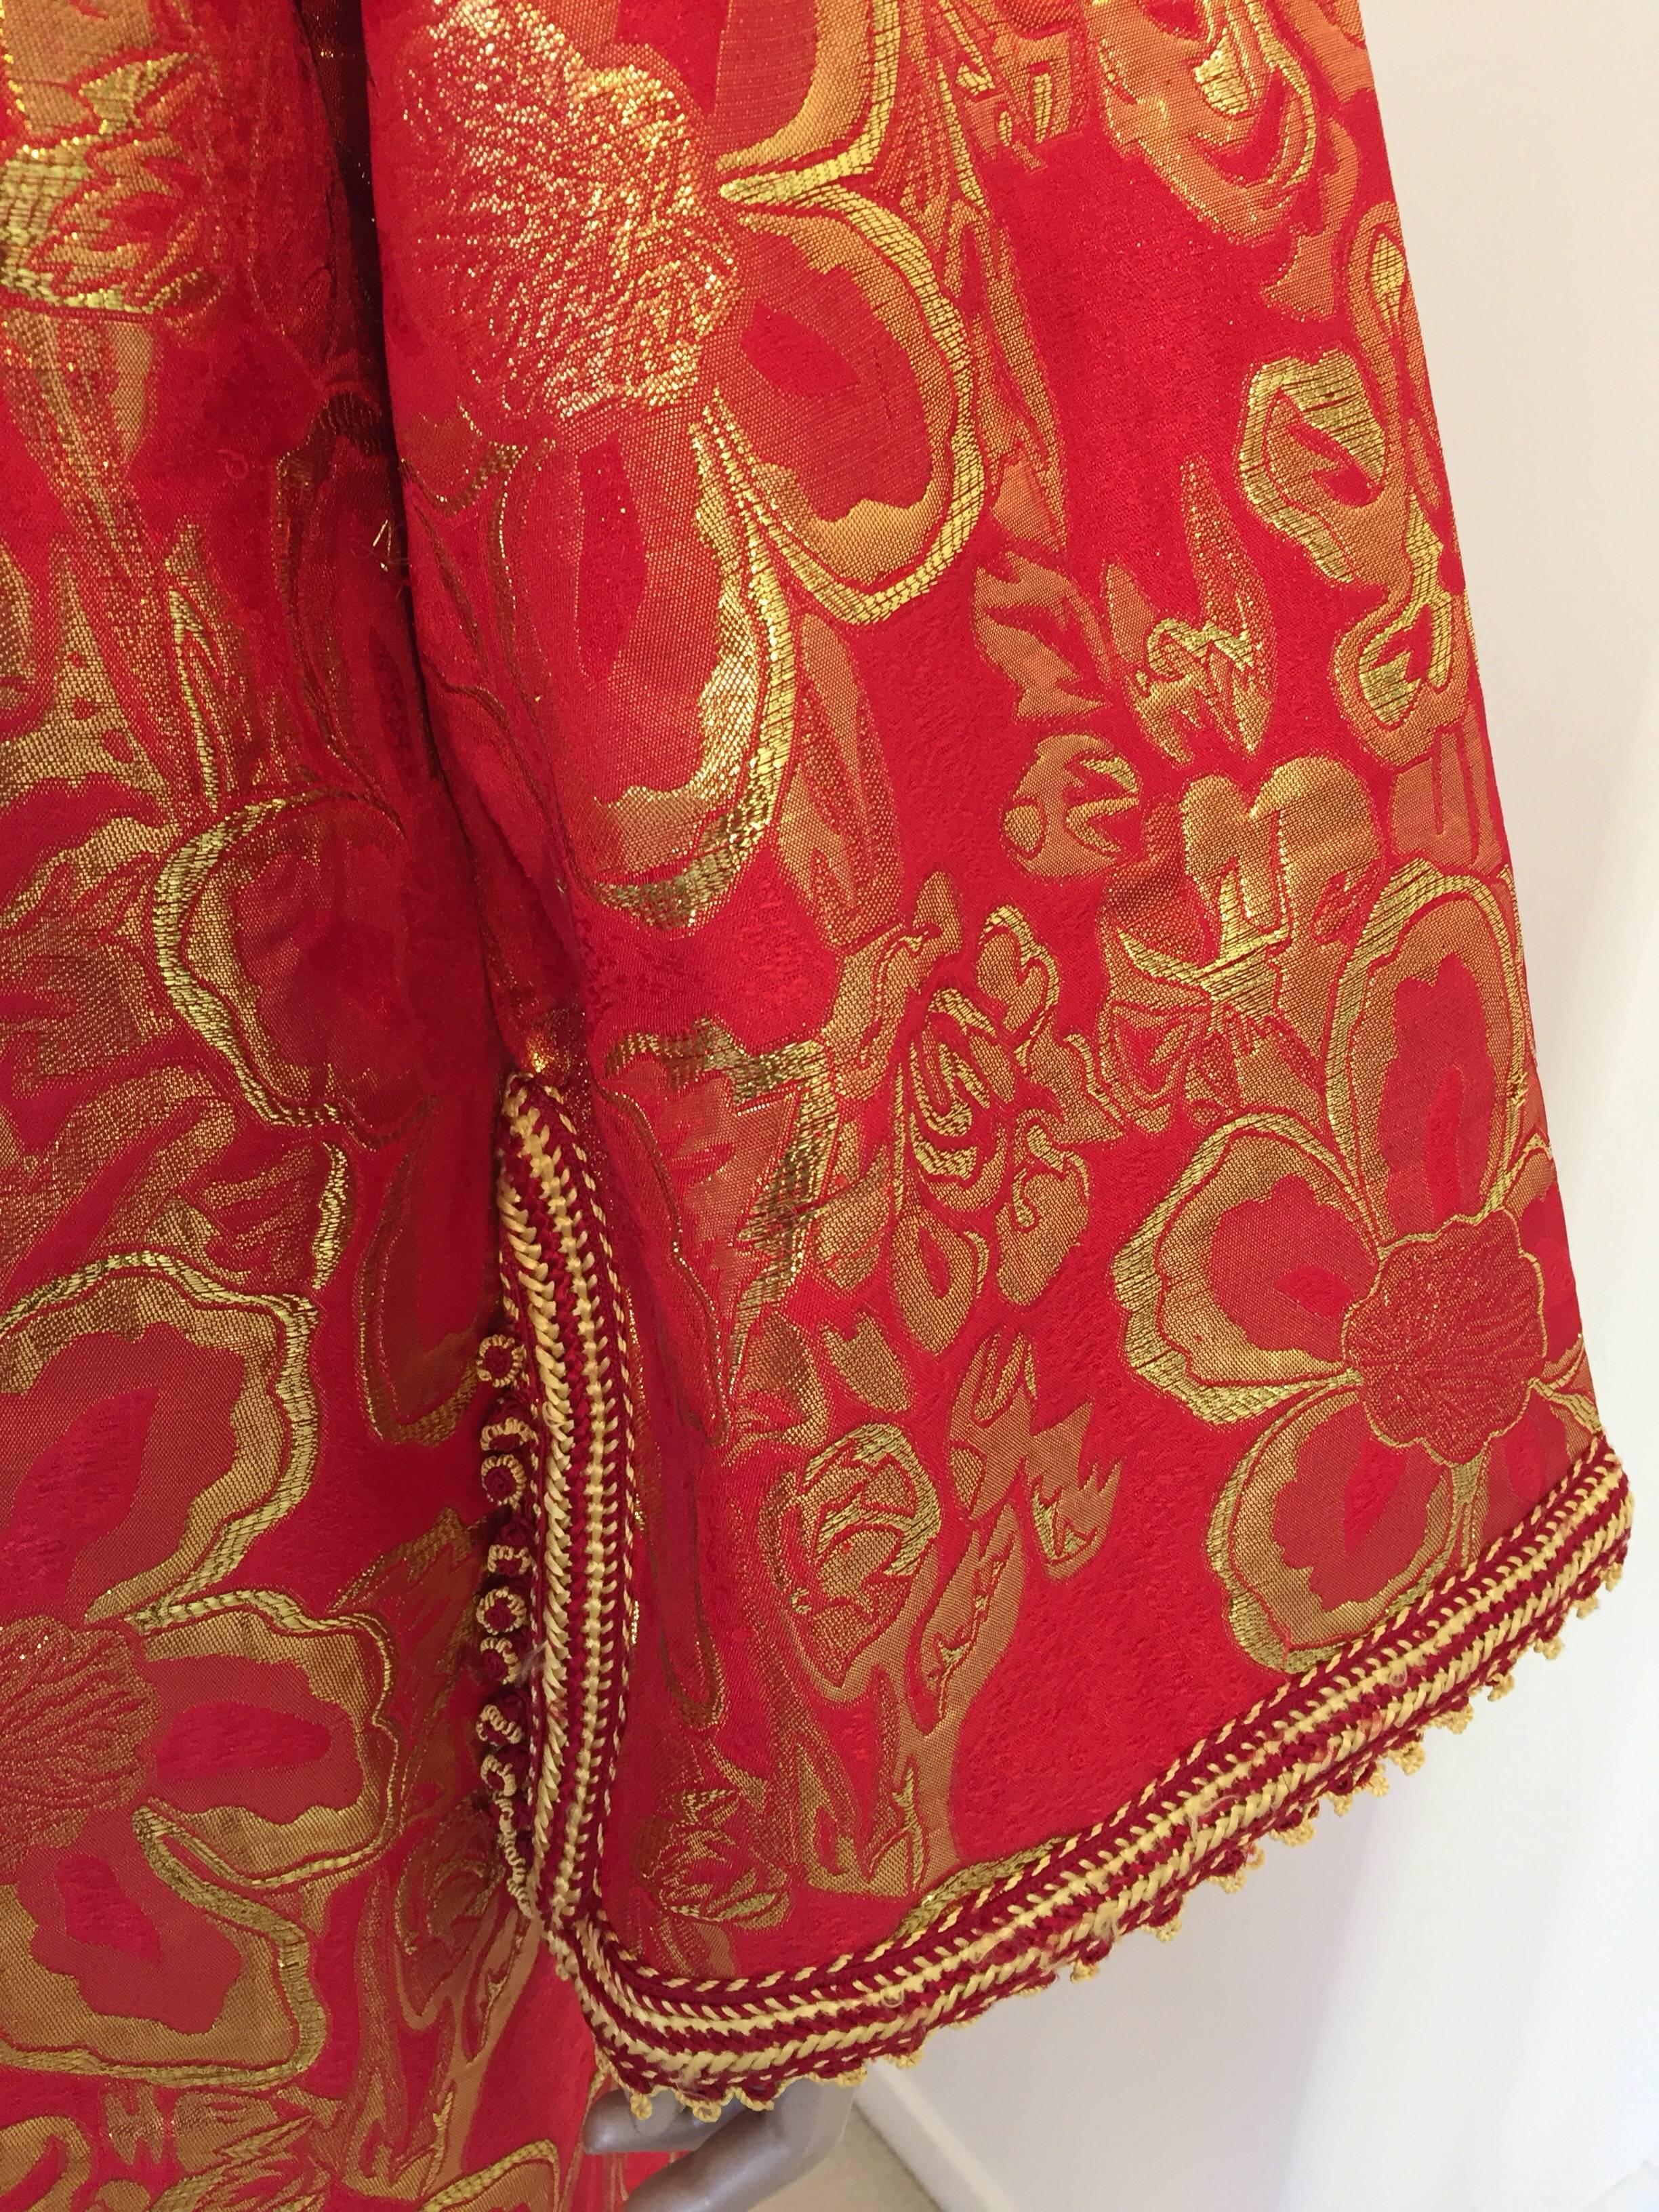 Vintage Moroccan Kaftan 1970s Red and Gold Floral Brocade Caftan Maxi Dress In Good Condition For Sale In North Hollywood, CA